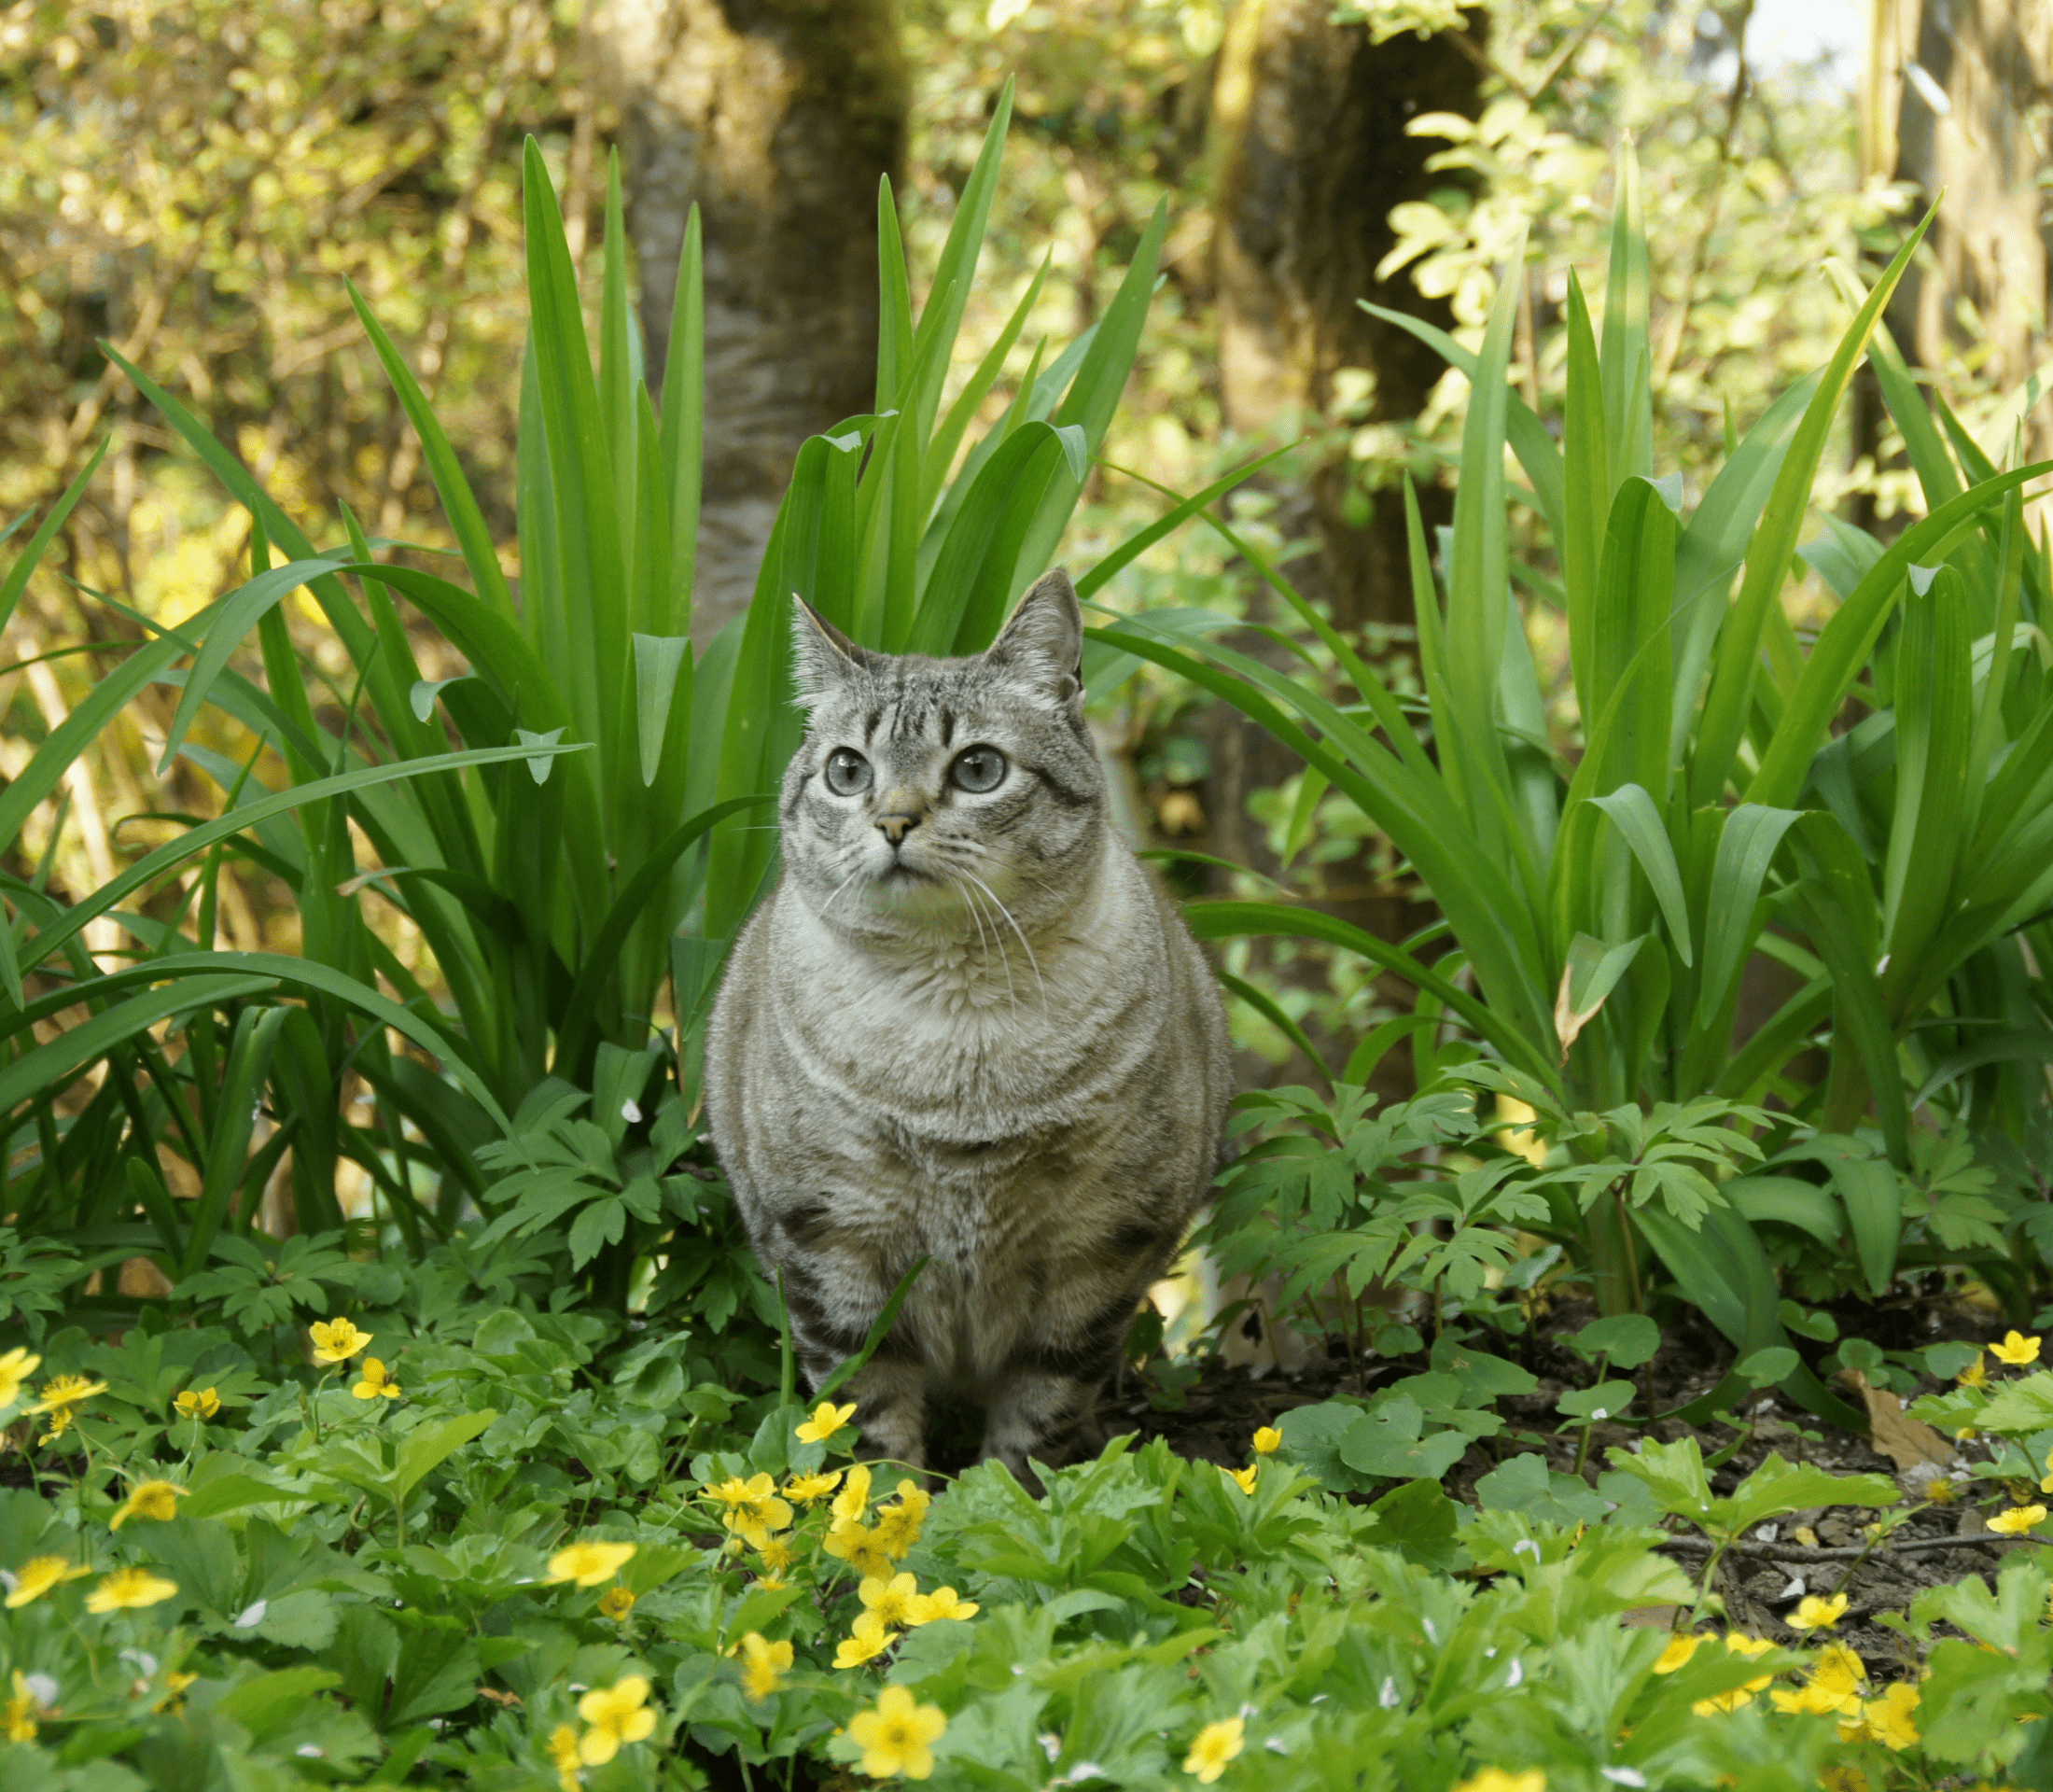 Gray cat on a grassy yard with small yellow flowers